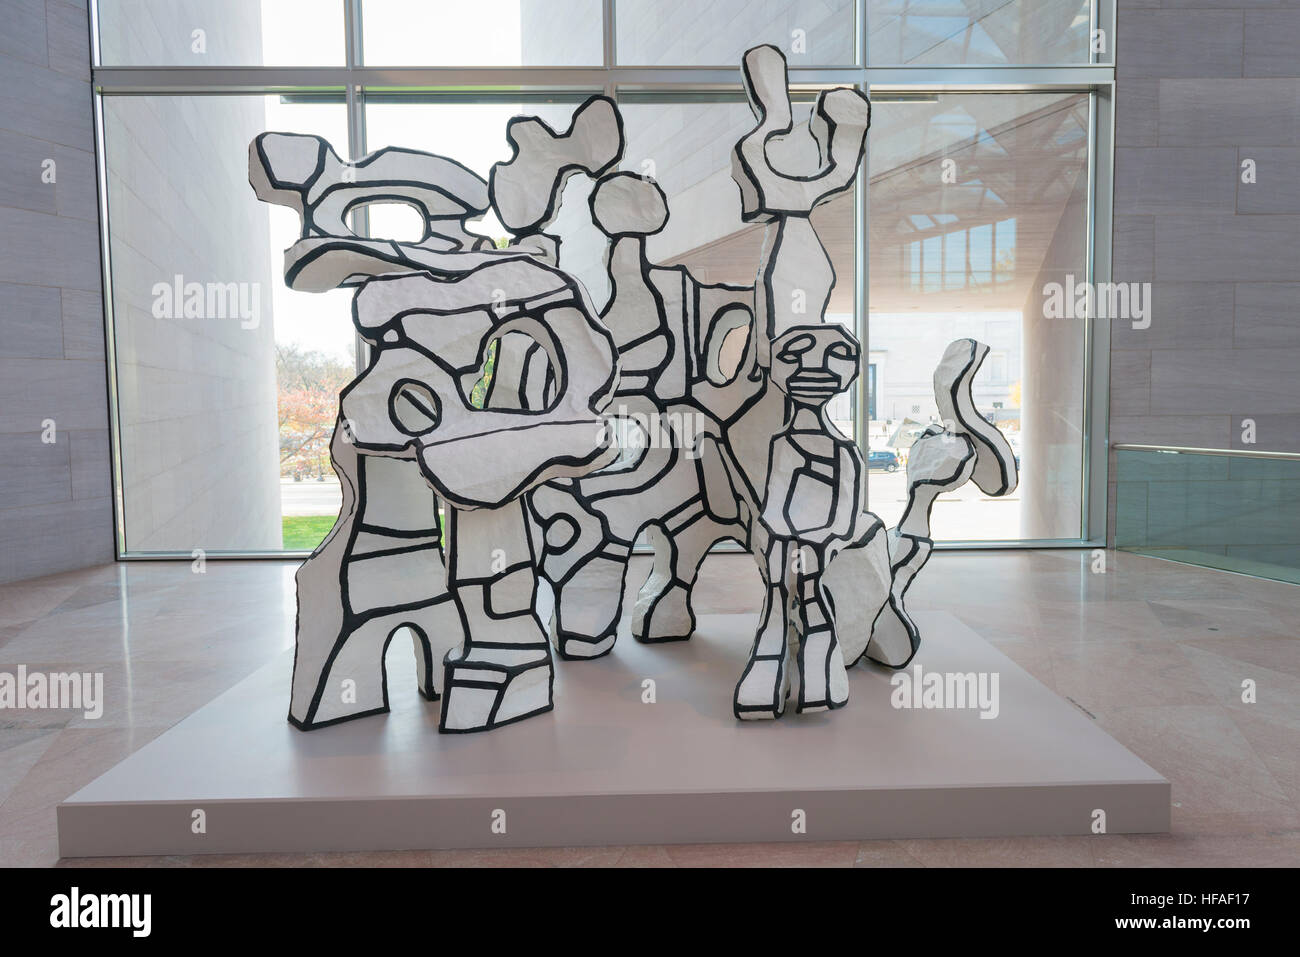 USA capital Washington DC District of Columbia National Gallery of Art Site a l'Homme Assis 1984 polyester resin by Jean Dubuffet Stock Photo